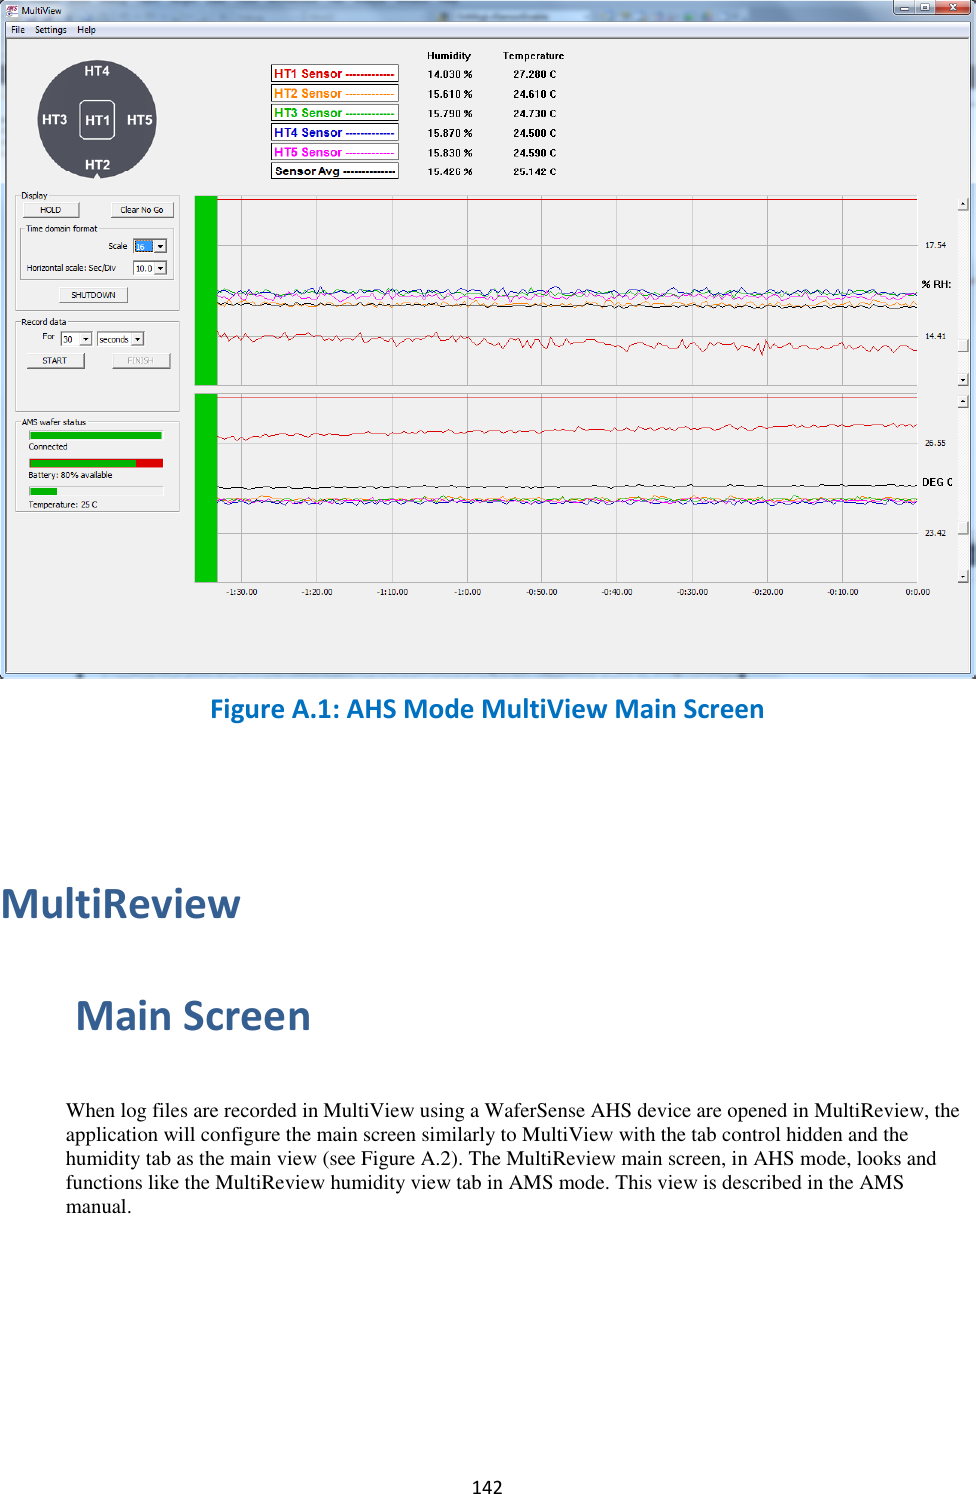   142  Figure A.1: AHS Mode MultiView Main Screen    MultiReview  Main Screen  When log files are recorded in MultiView using a WaferSense AHS device are opened in MultiReview, the application will configure the main screen similarly to MultiView with the tab control hidden and the humidity tab as the main view (see Figure A.2). The MultiReview main screen, in AHS mode, looks and functions like the MultiReview humidity view tab in AMS mode. This view is described in the AMS manual. 